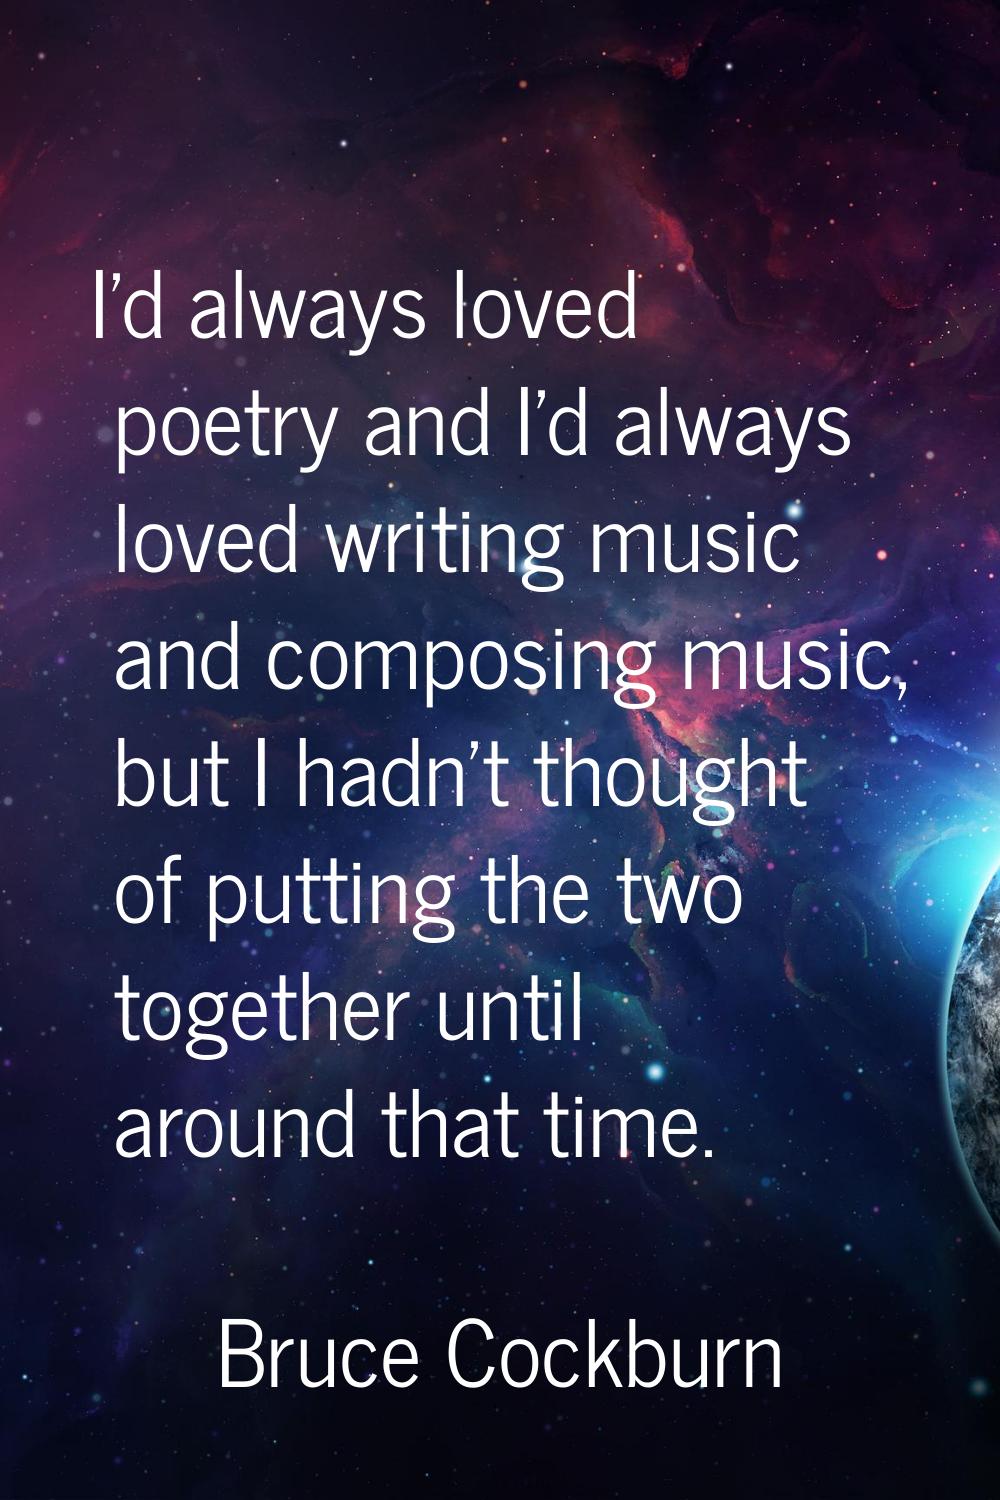 I'd always loved poetry and I'd always loved writing music and composing music, but I hadn't though